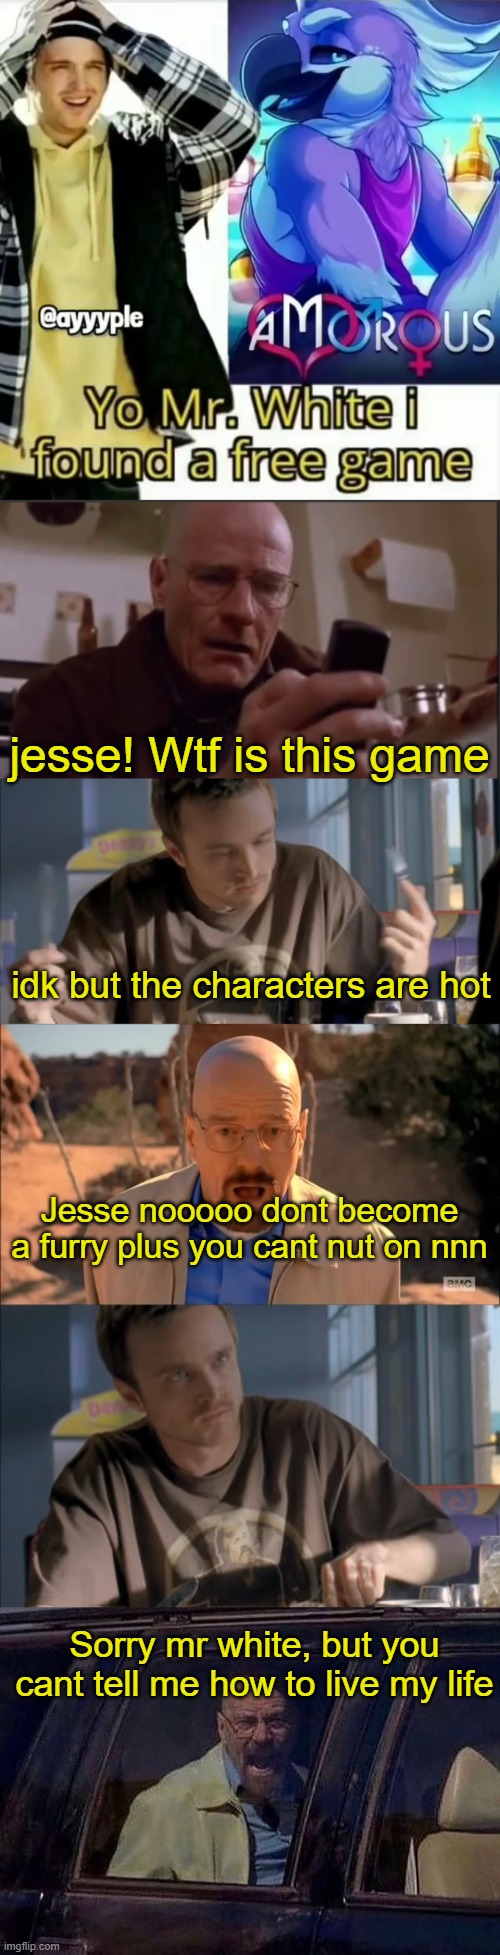 sad story :( | jesse! Wtf is this game; idk but the characters are hot; Jesse nooooo dont become a furry plus you cant nut on nnn; Sorry mr white, but you cant tell me how to live my life | image tagged in yo mr white i found a free game,walter white sad,jesse wtf are you talking about,breaking bad waltuh | made w/ Imgflip meme maker